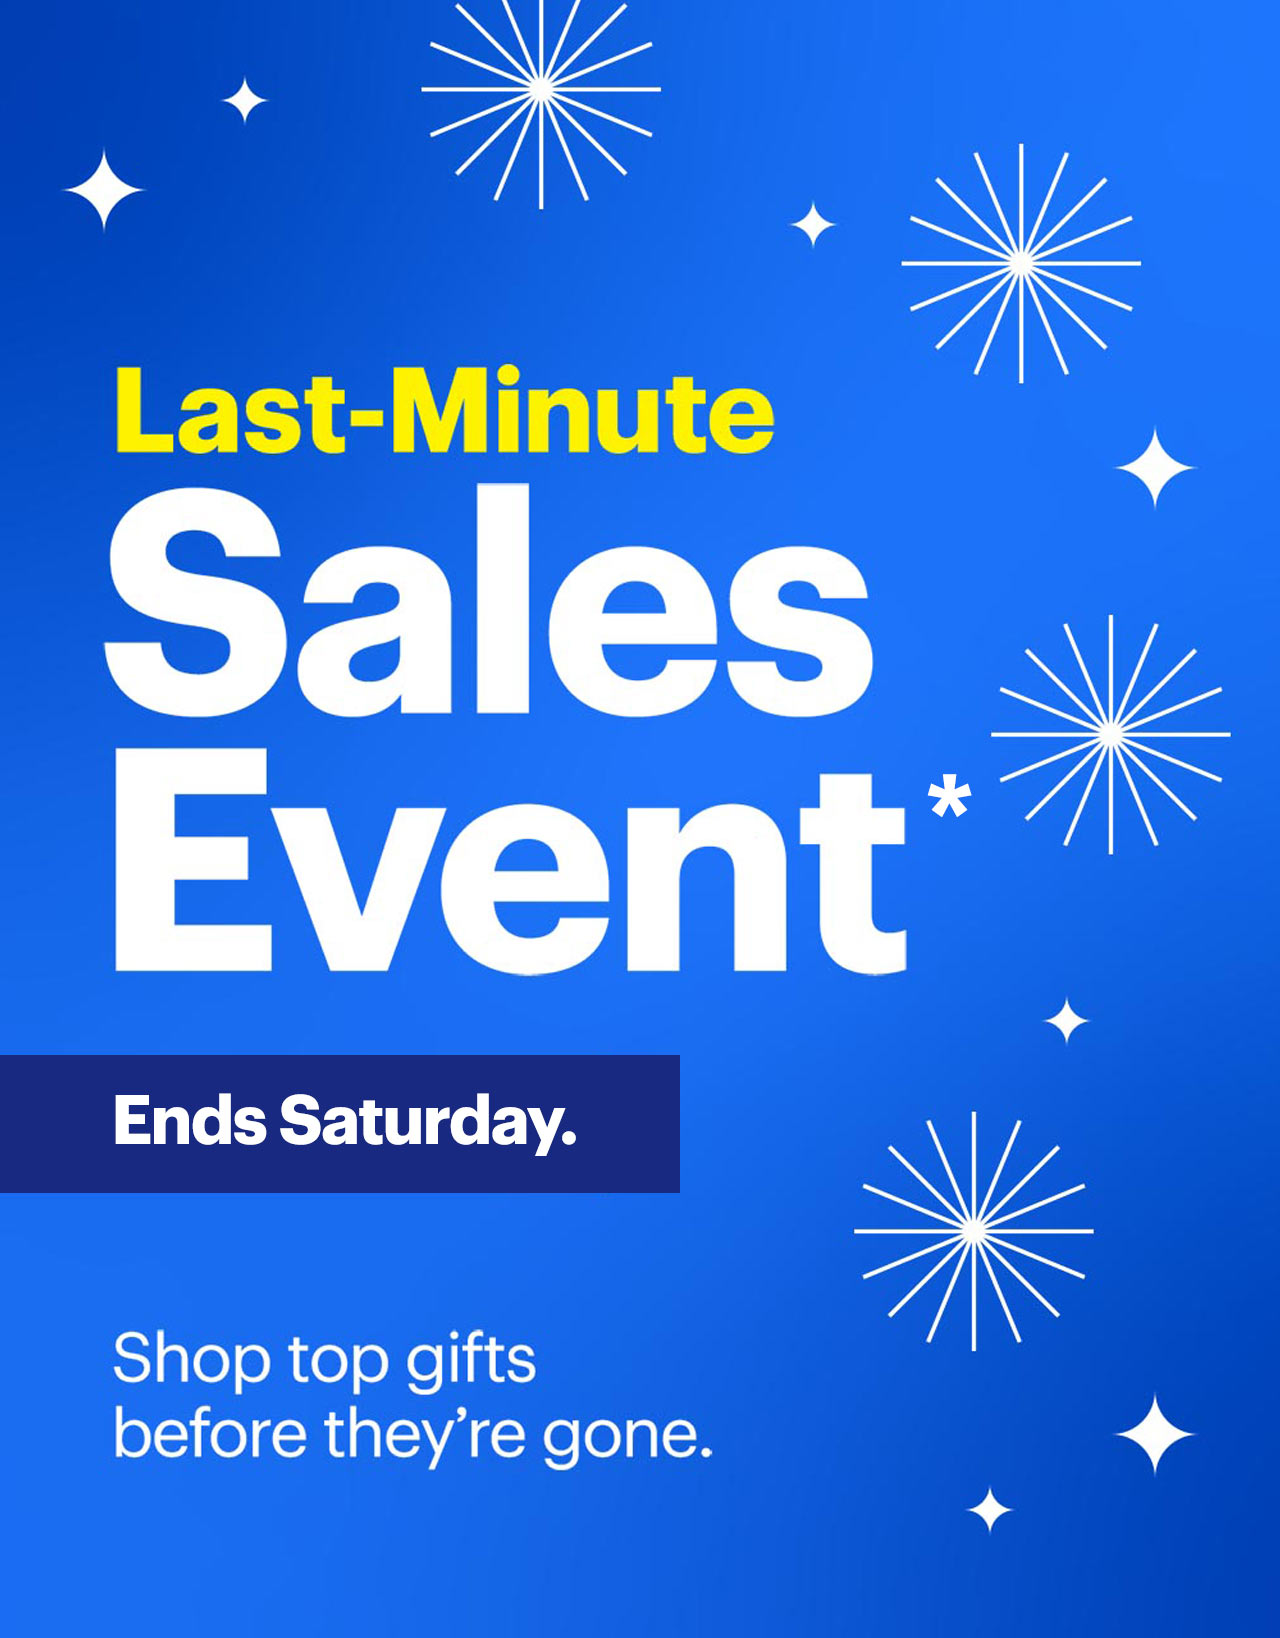 Last-Minute Sales Event ends Saturday. Shop top gifts before they're gone. Reference disclaimer.